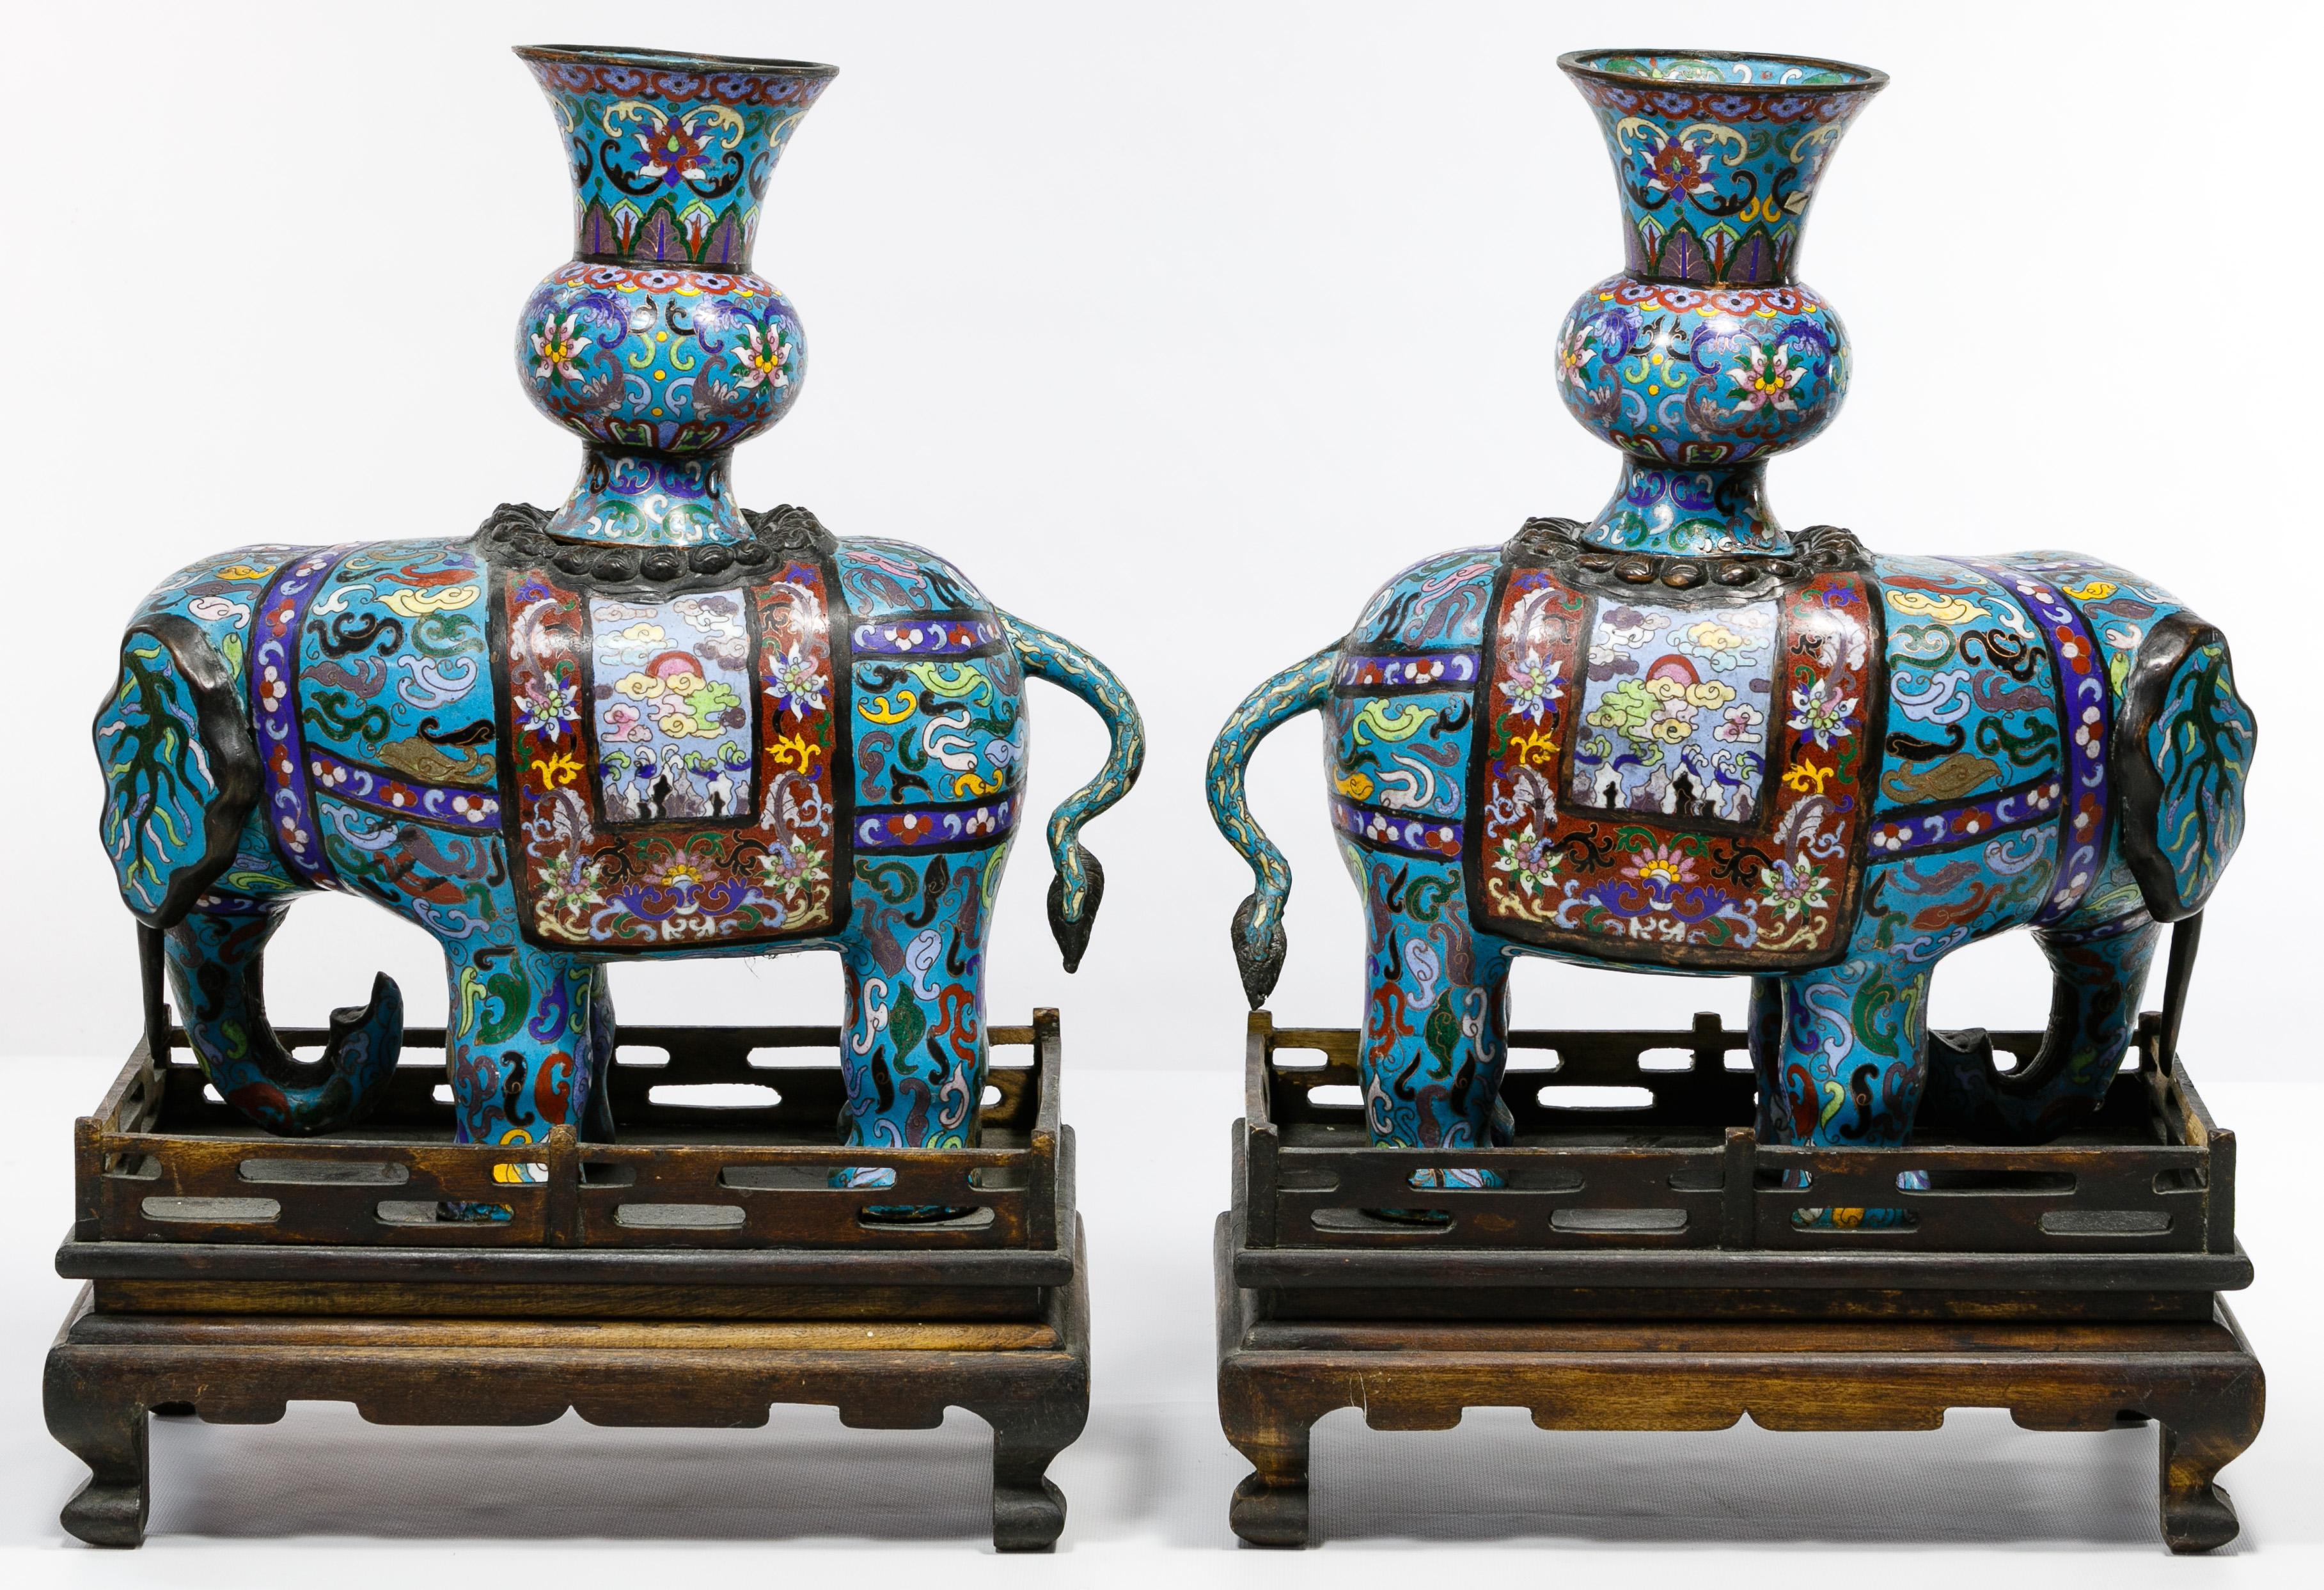 Large pair of standing elephants having fitted vases on their backs on wooden display stands
Measures: Height: 15 inches, Length: 14 inches, Width: 6 inches (without stands), Total Height with stand: 20.5